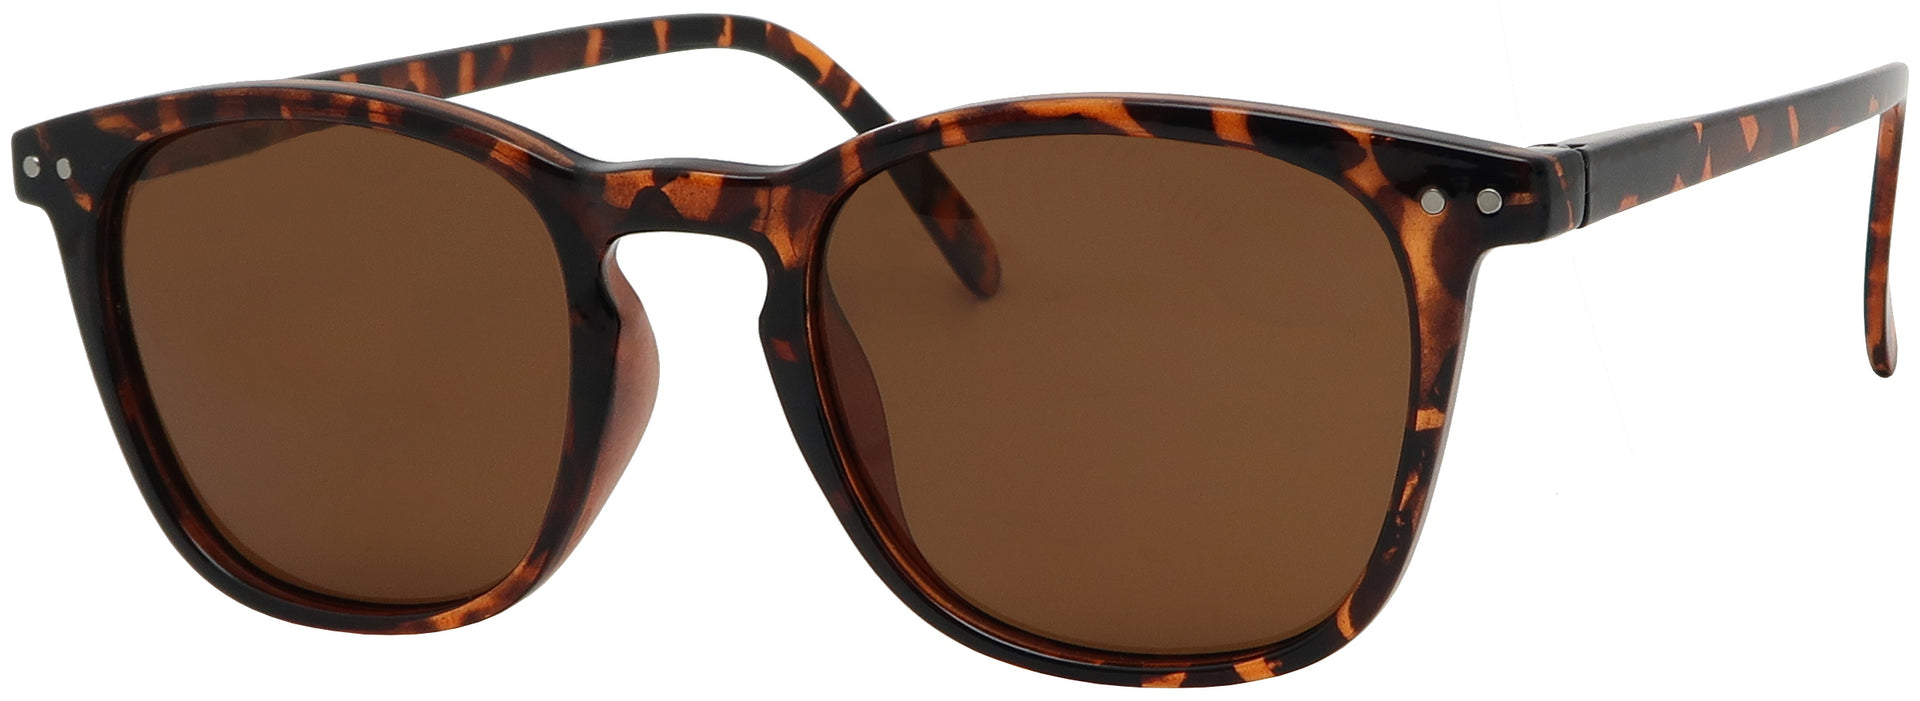 ST1641PL - Wholesale Round Style Polarized Sunglasses with Spring Hinged Temples in Tortoise